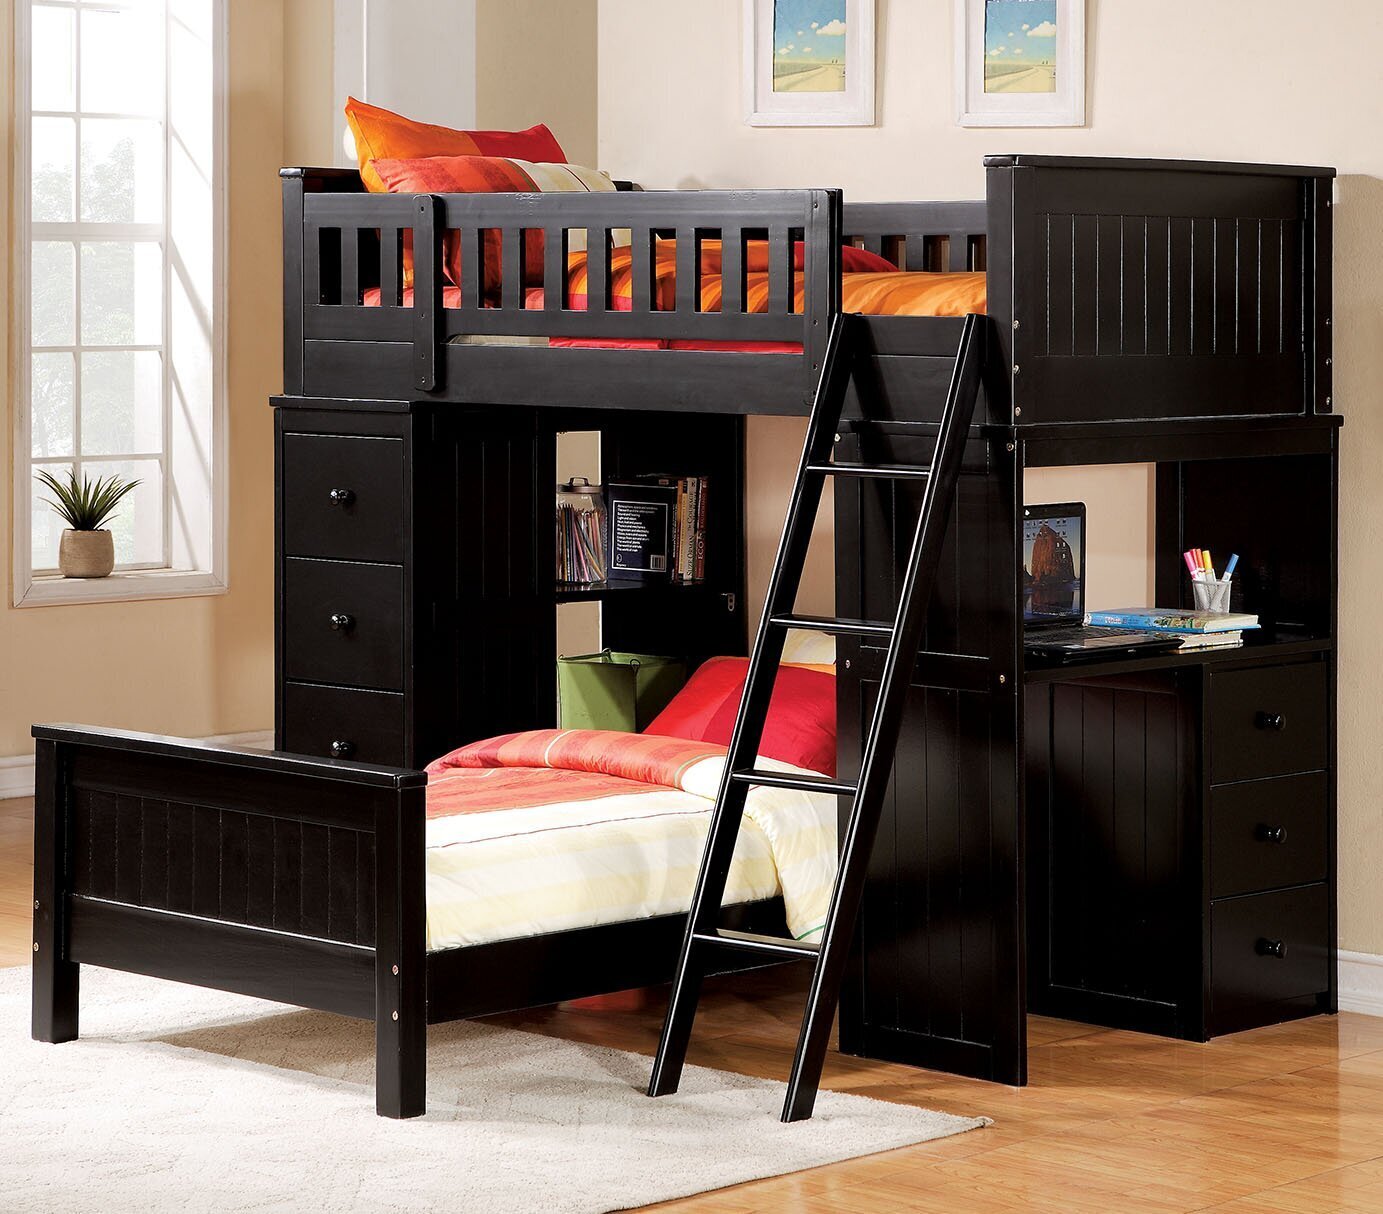 Combined Collection Bunkbed